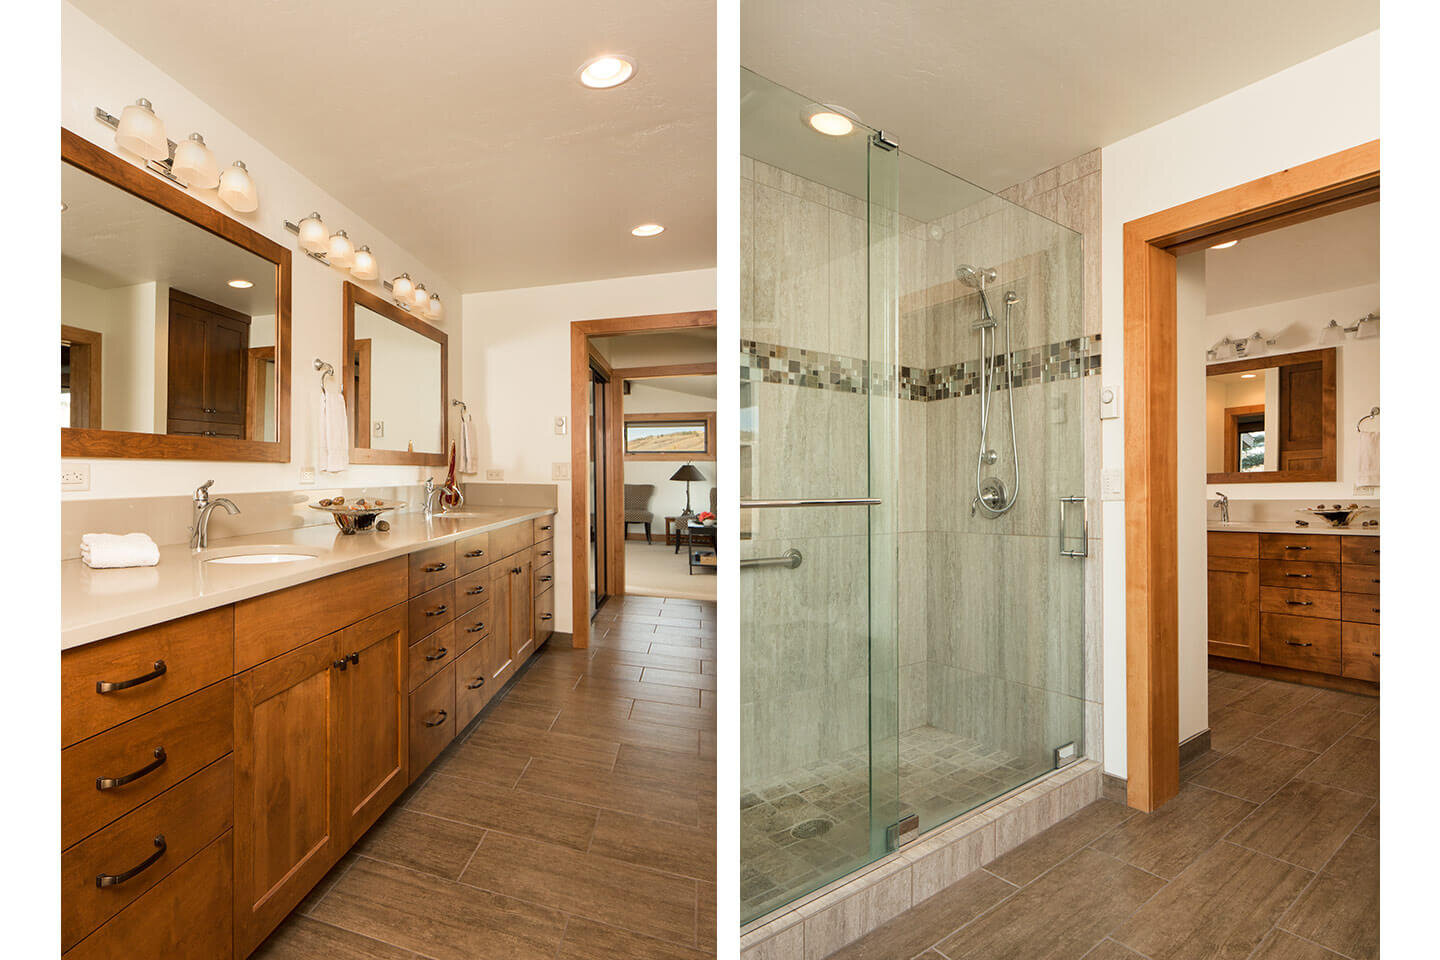 Master bathroom with alder wood cabinetry and glass door